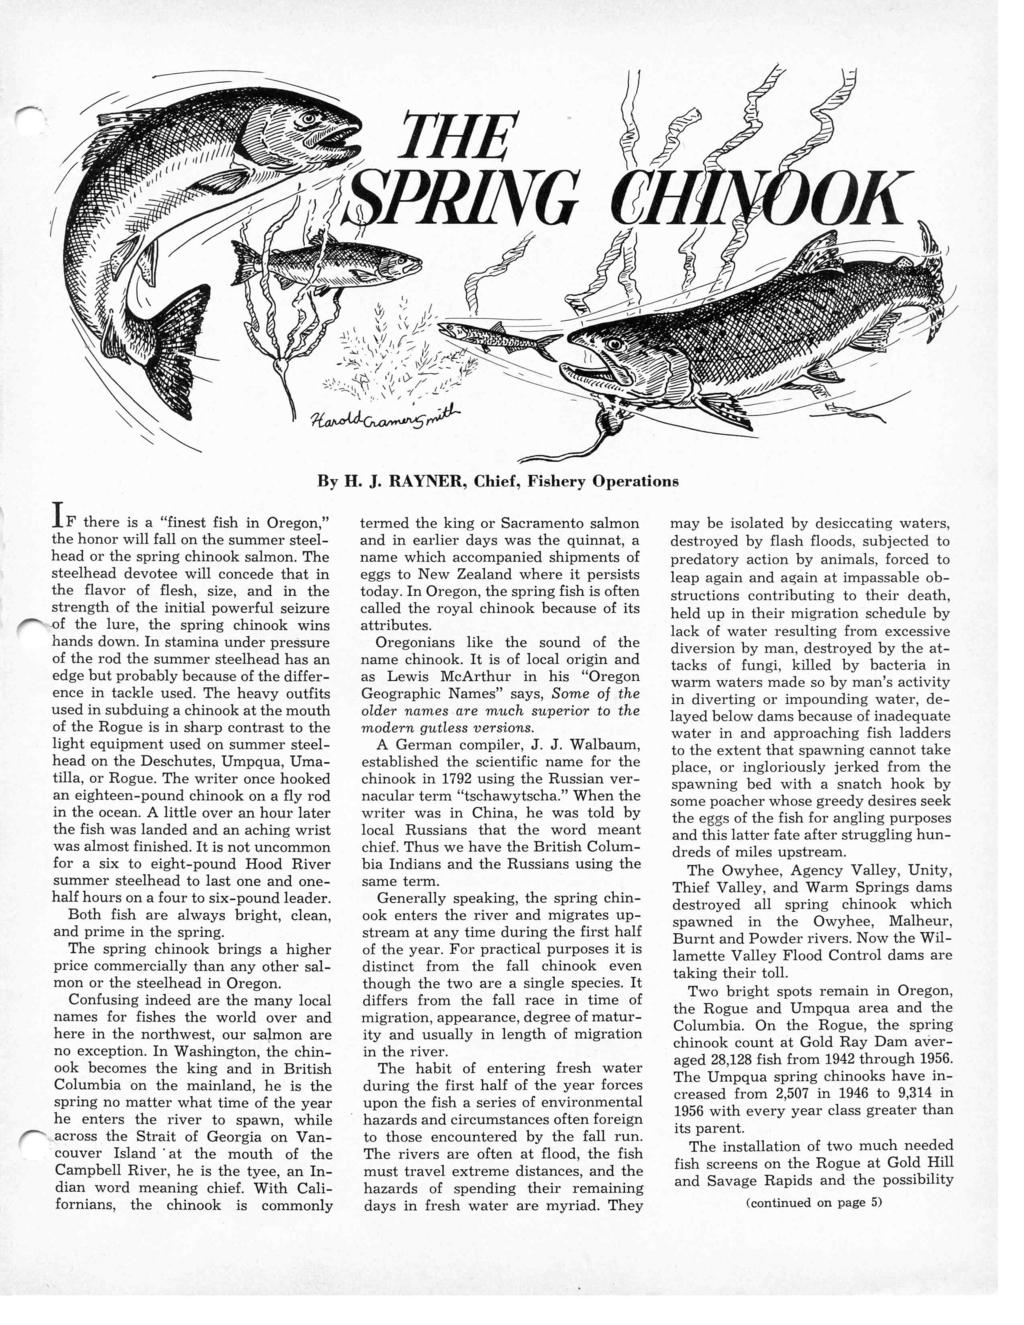 By H. J. RAYNER, Chief, Fishery Operations IF there is a "finest fish in Oregon," the honor will fall on the summer steelhead or the spring chinook salmon.